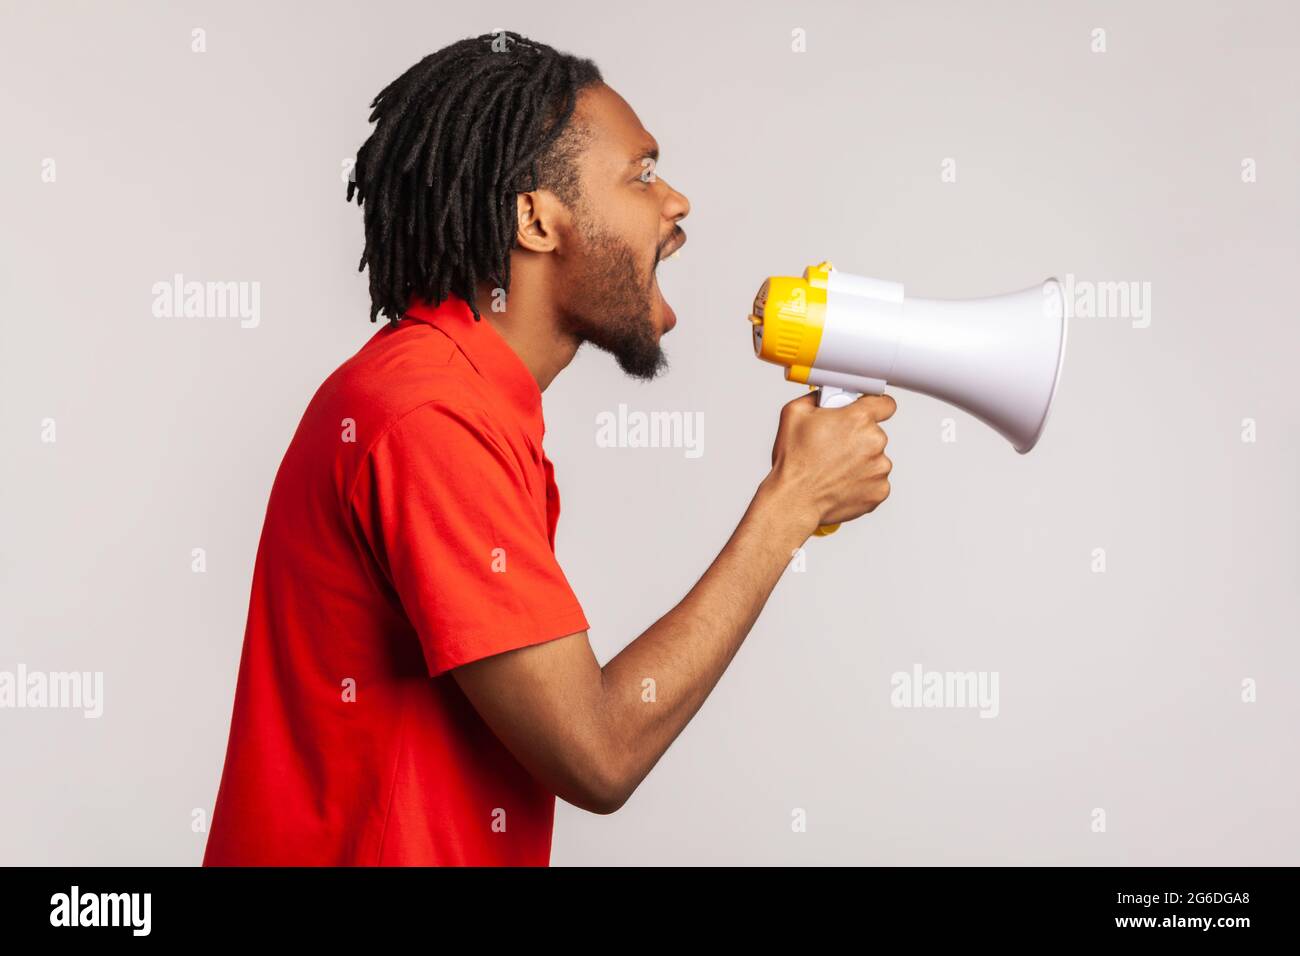 Profile of man with dreadlocks and beard wearing red casual style T-shirt, loudly screaming at megaphone, making protest, wants to be heard. Indoor st Stock Photo